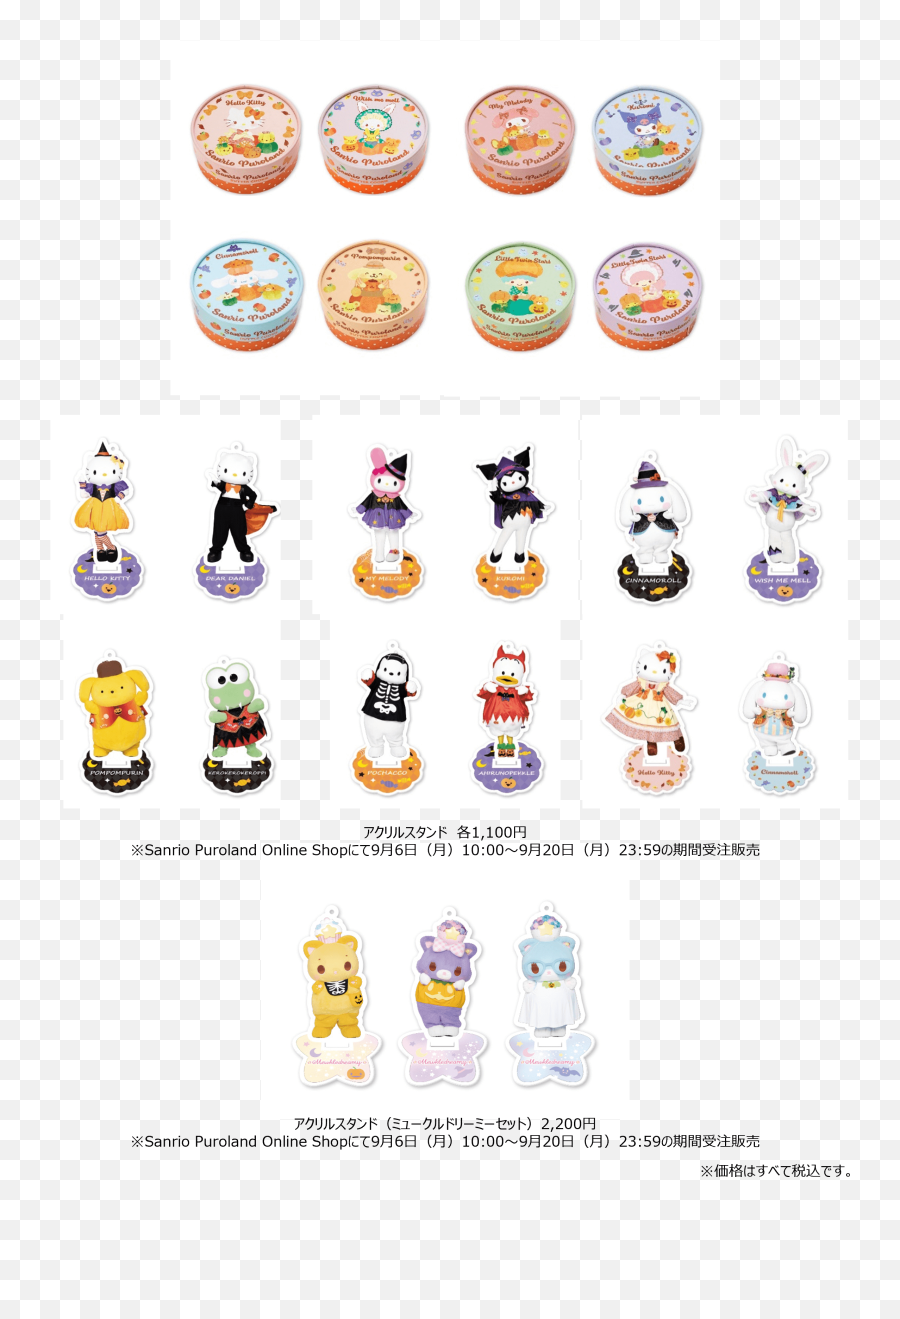 Hello Kitty And Pierre Hermé Collaboration Series Coming To Emoji,Kuromi Transparent